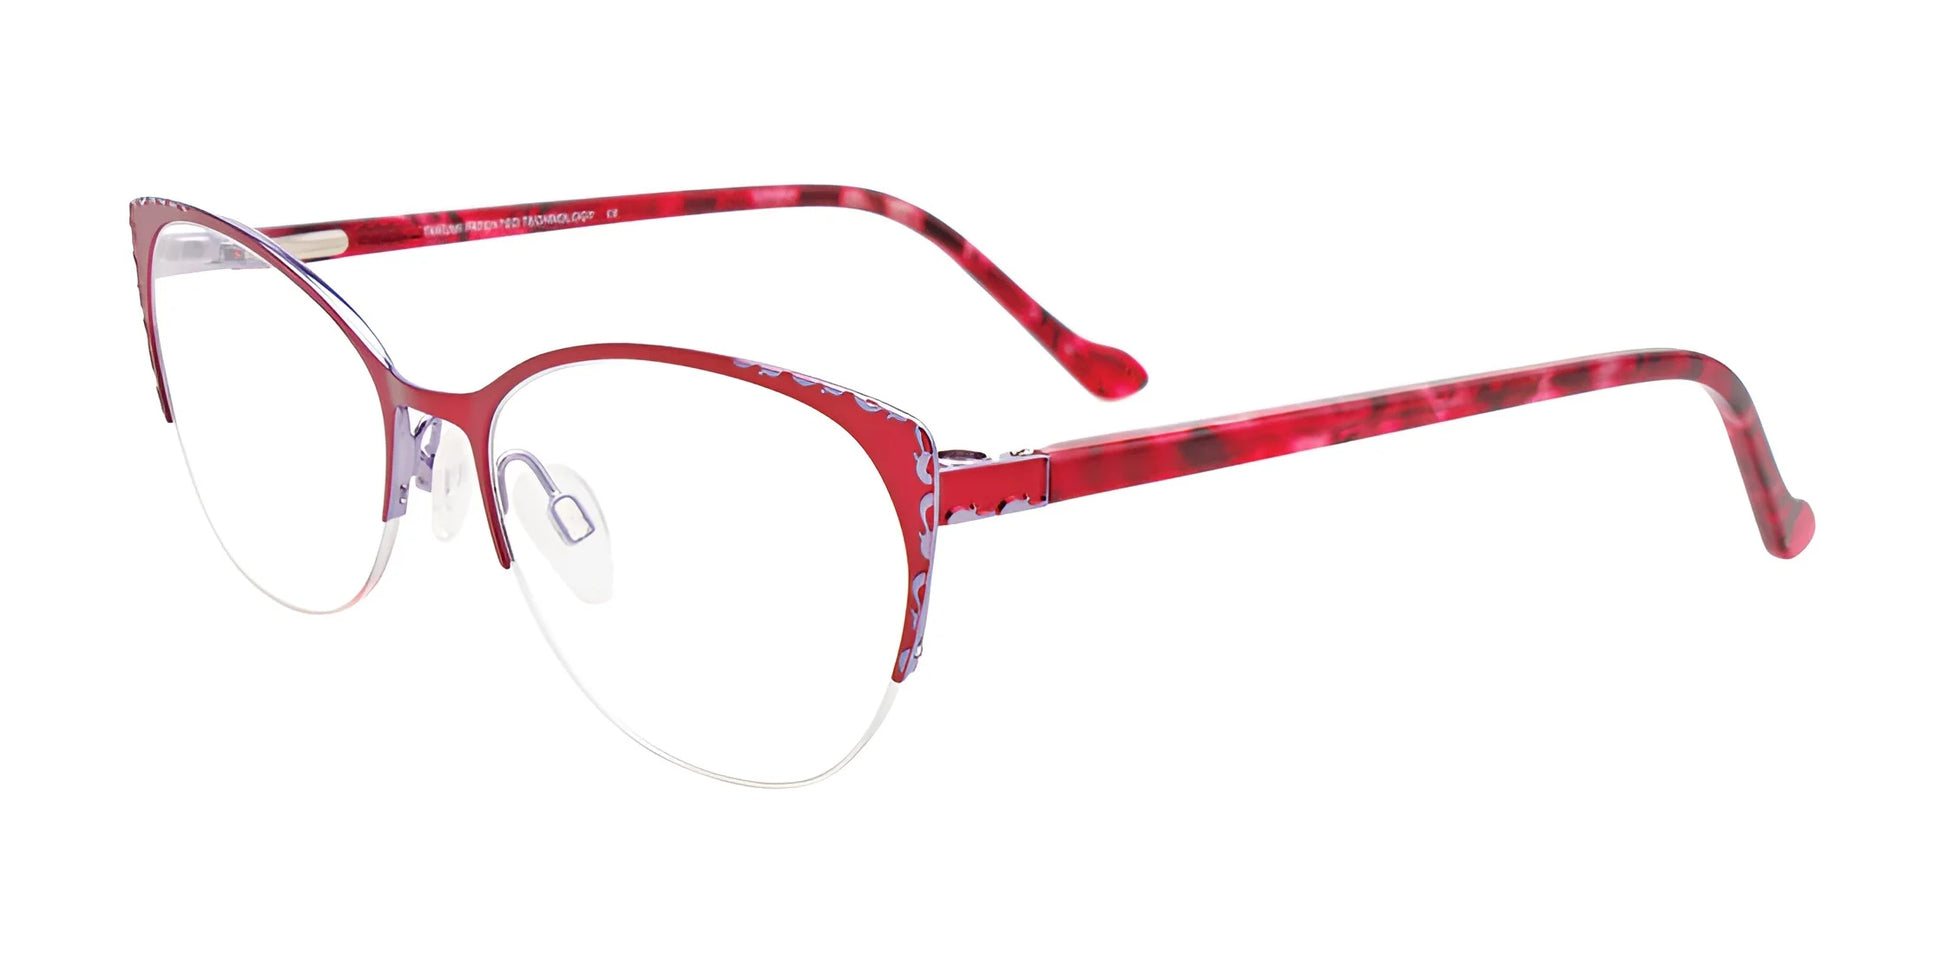 Takumi TK1204 Eyeglasses with Clip-on Sunglasses Sat Red & Sh Lilac / Red Tort